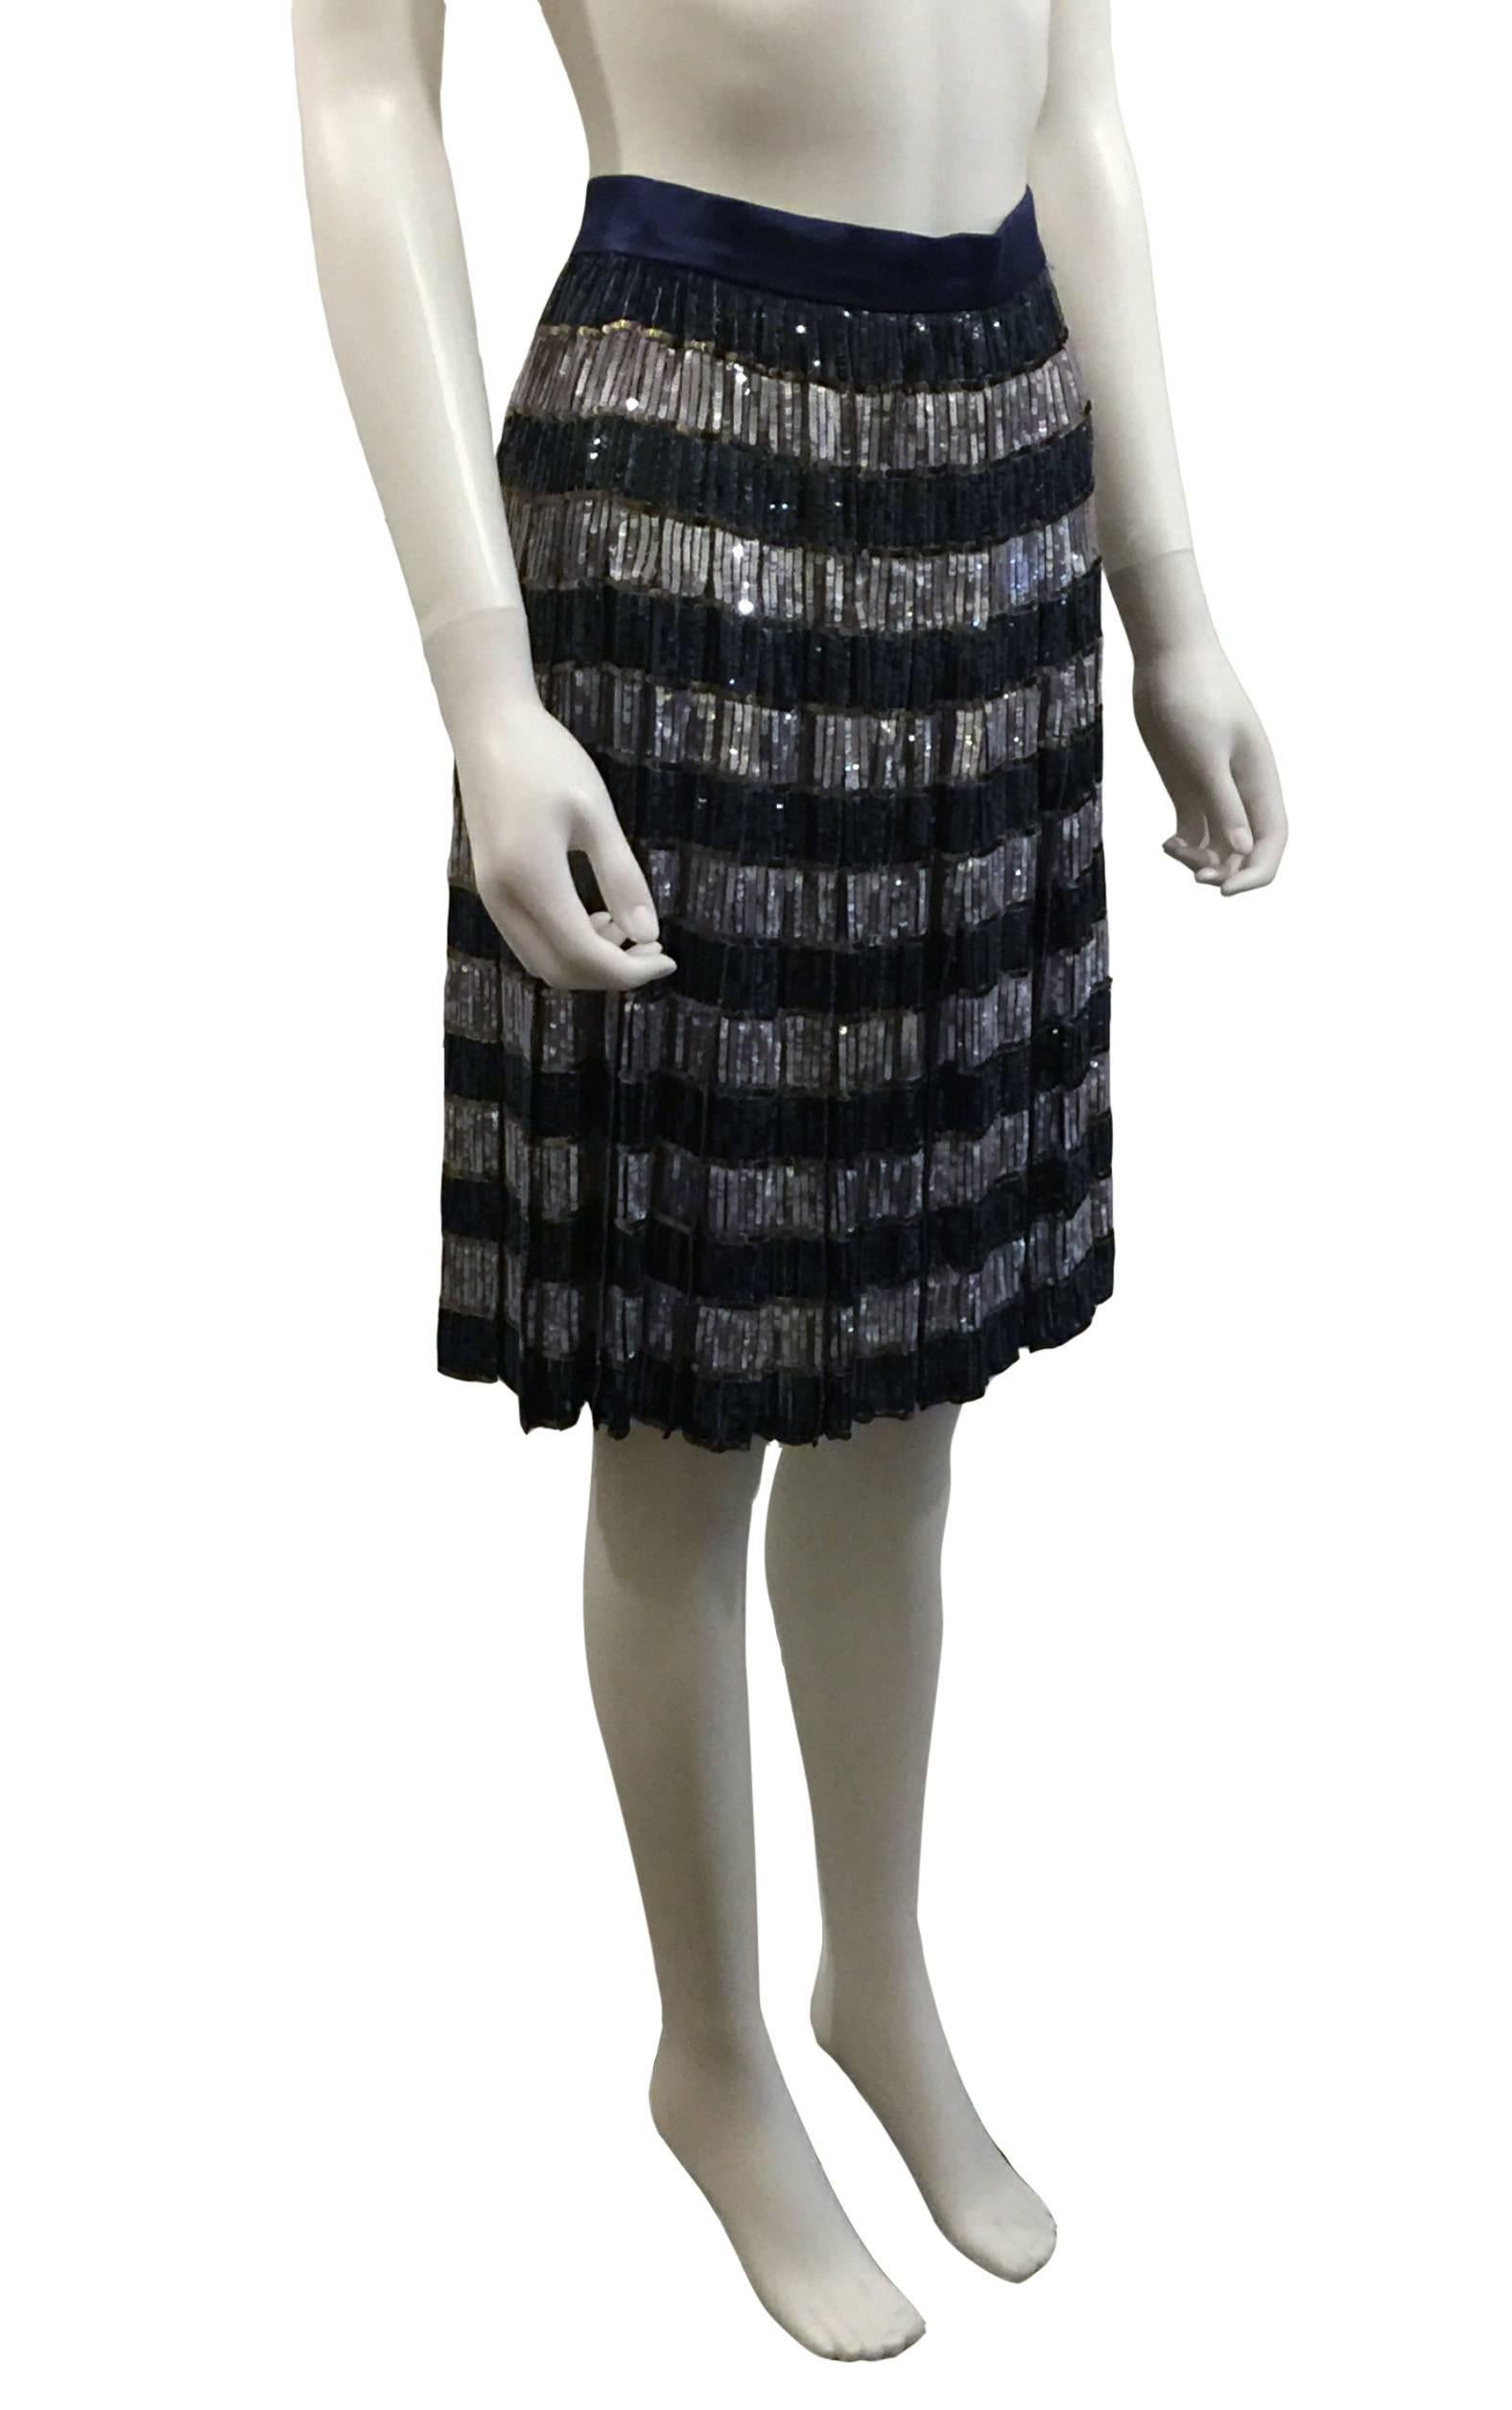 Valentino Sequin Skirt.  Vintage.   Size UK10.  Pleated knee-length sequin skirt in shades of blue/mauve & black.   Good condition.  This item is guaranteed to be 100% authentic.  Purchased from the Valentino 1990’s Collection.   This item is a